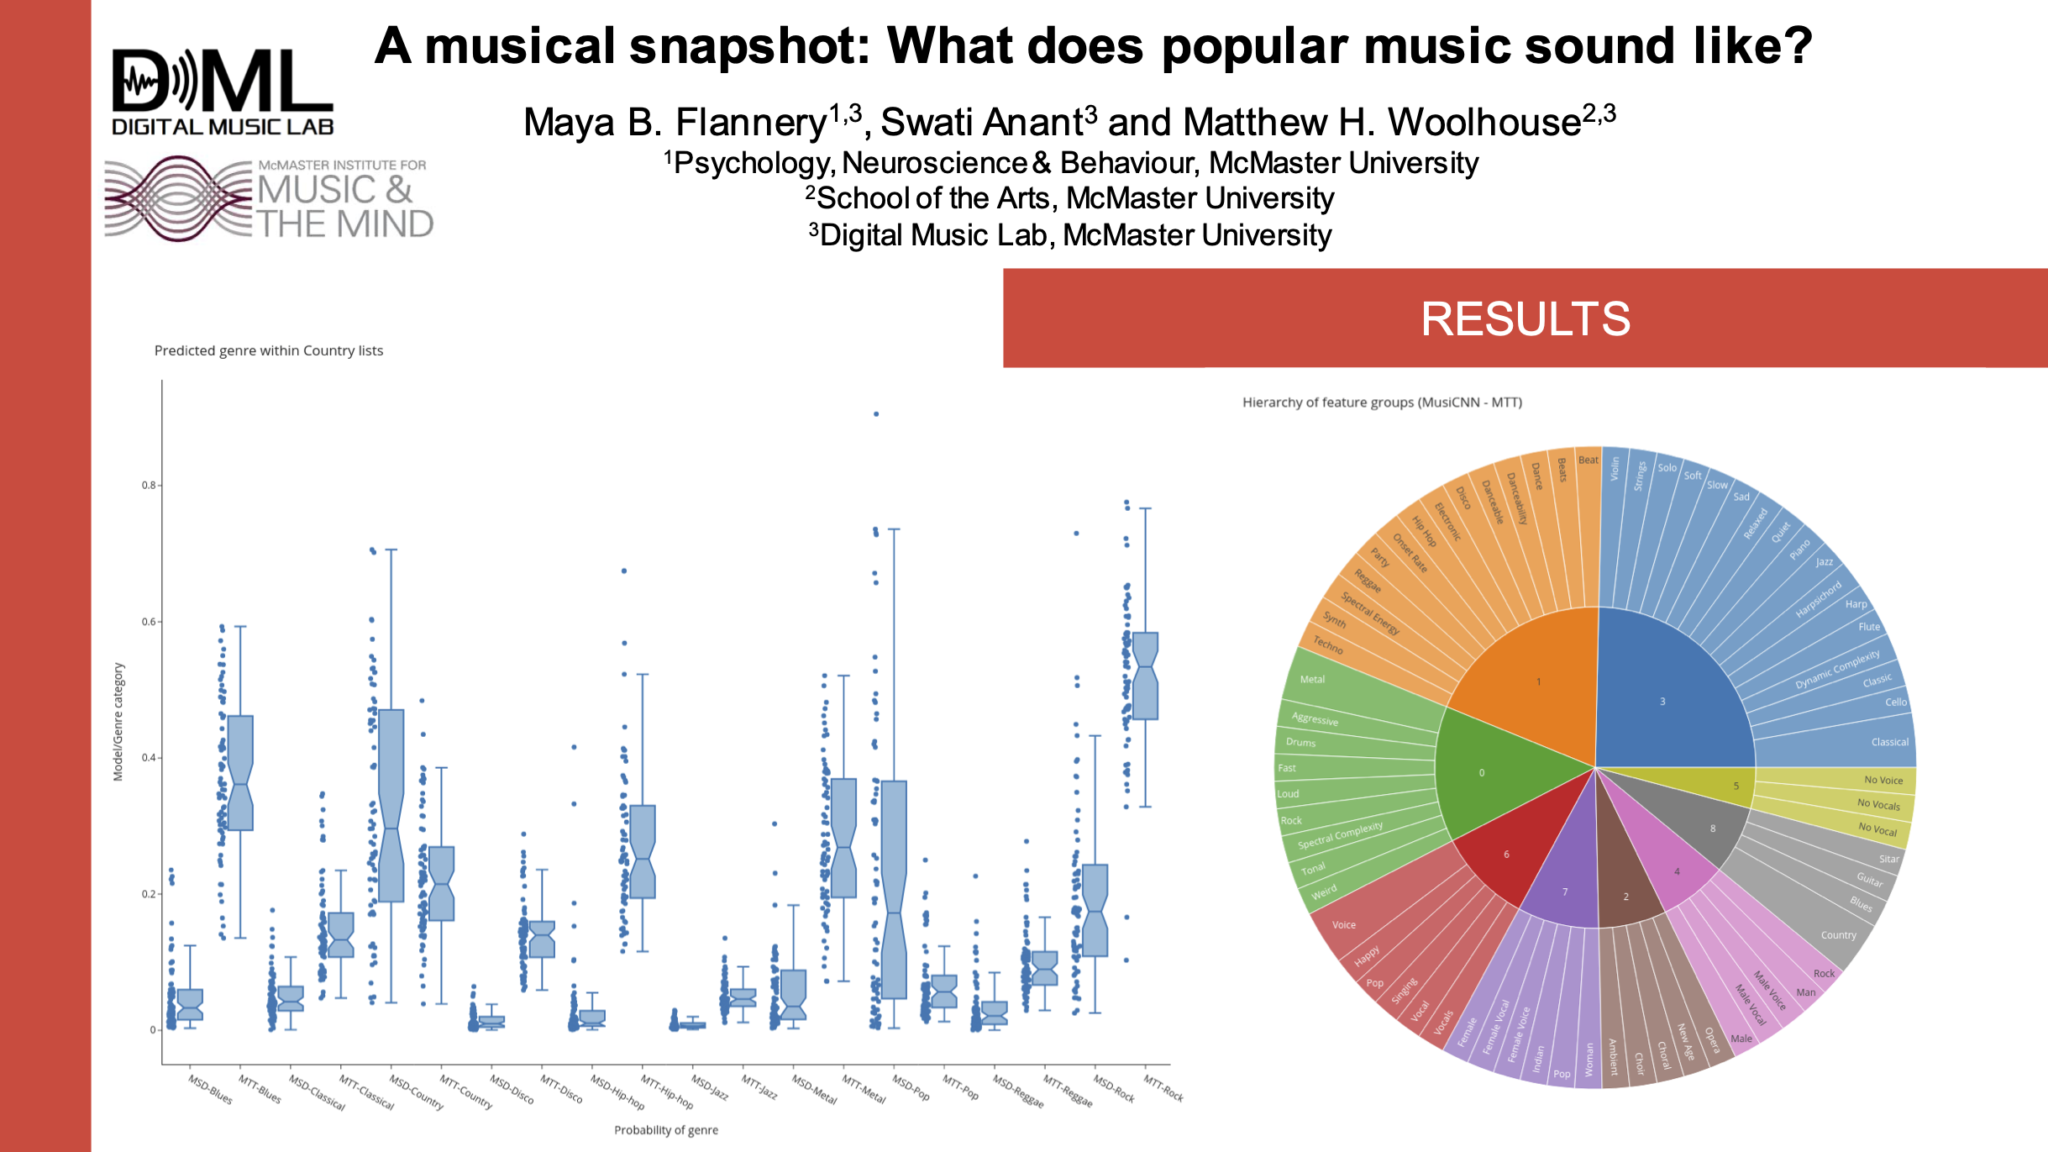 Part of the digital poster for "A musical snapshot: What does popular music sound like?" by Maya B. Flannery, Swati Anant, and Matthew H. Woolhouse. This slide shows figures in the results.